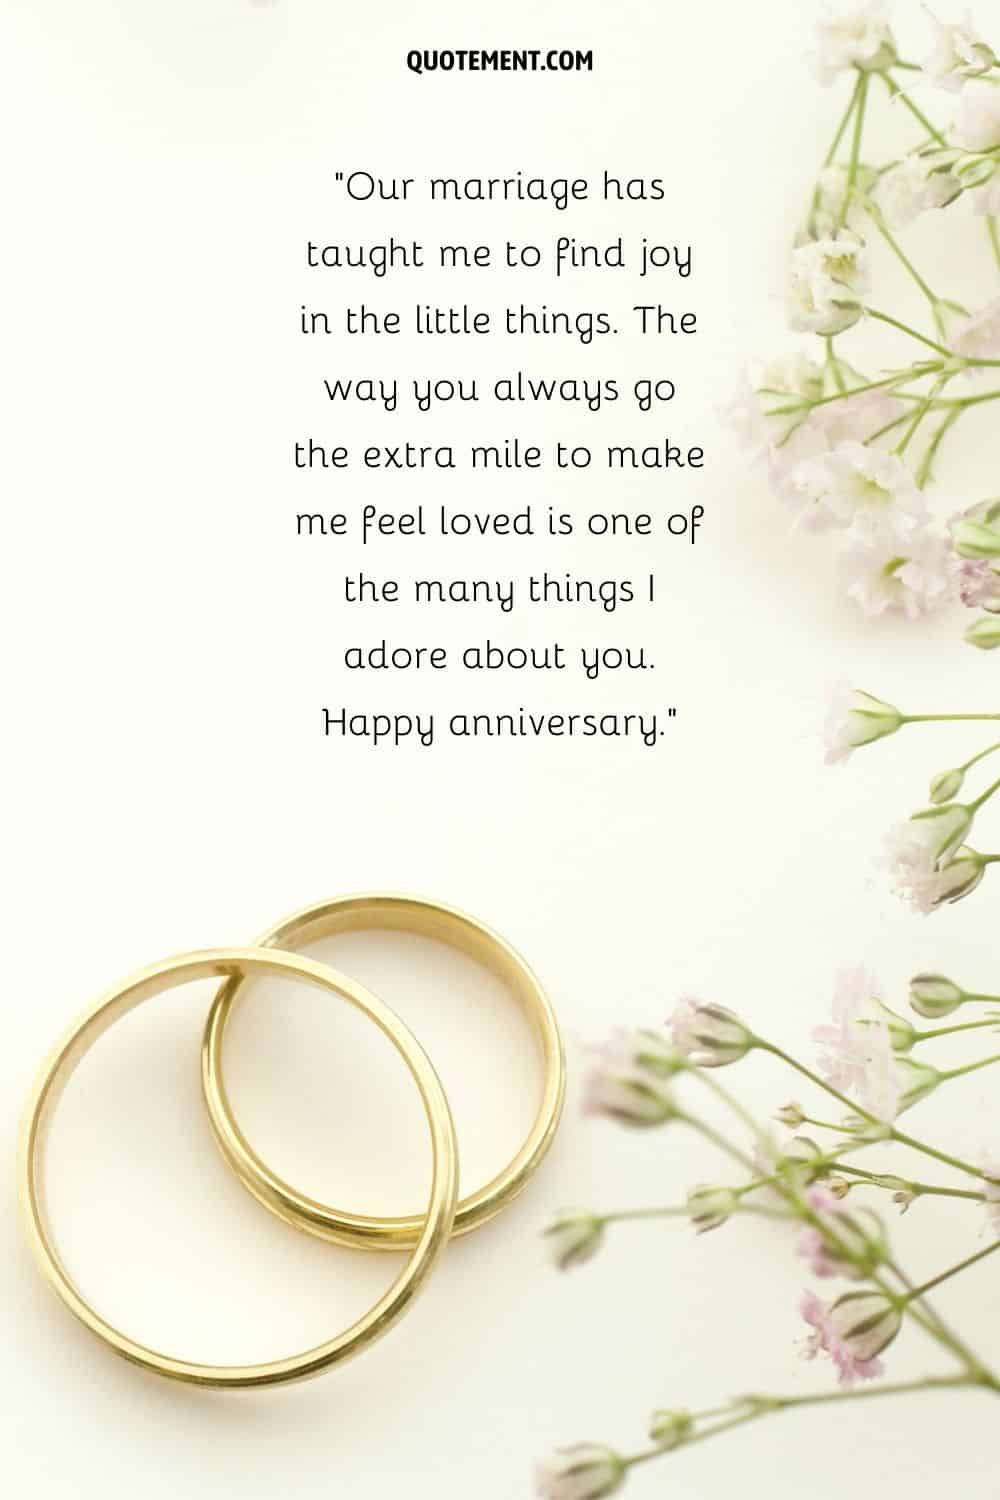 white flowers and wedding anniversary rings representing anniversary quote for your wife